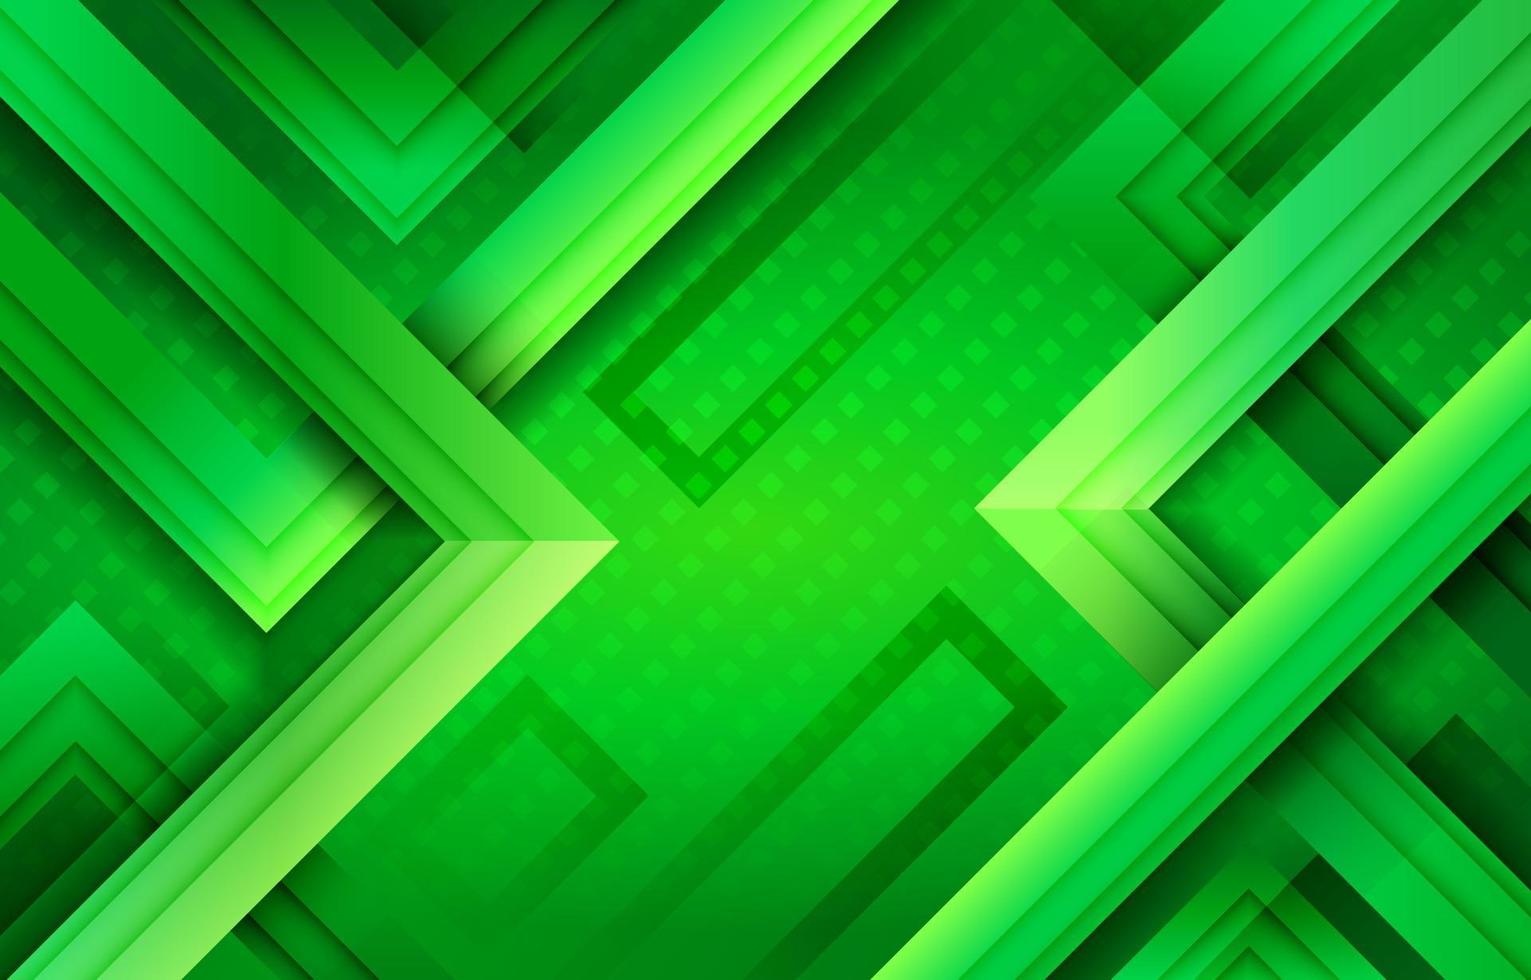 Geometric Line Square Abstract Green Background vector